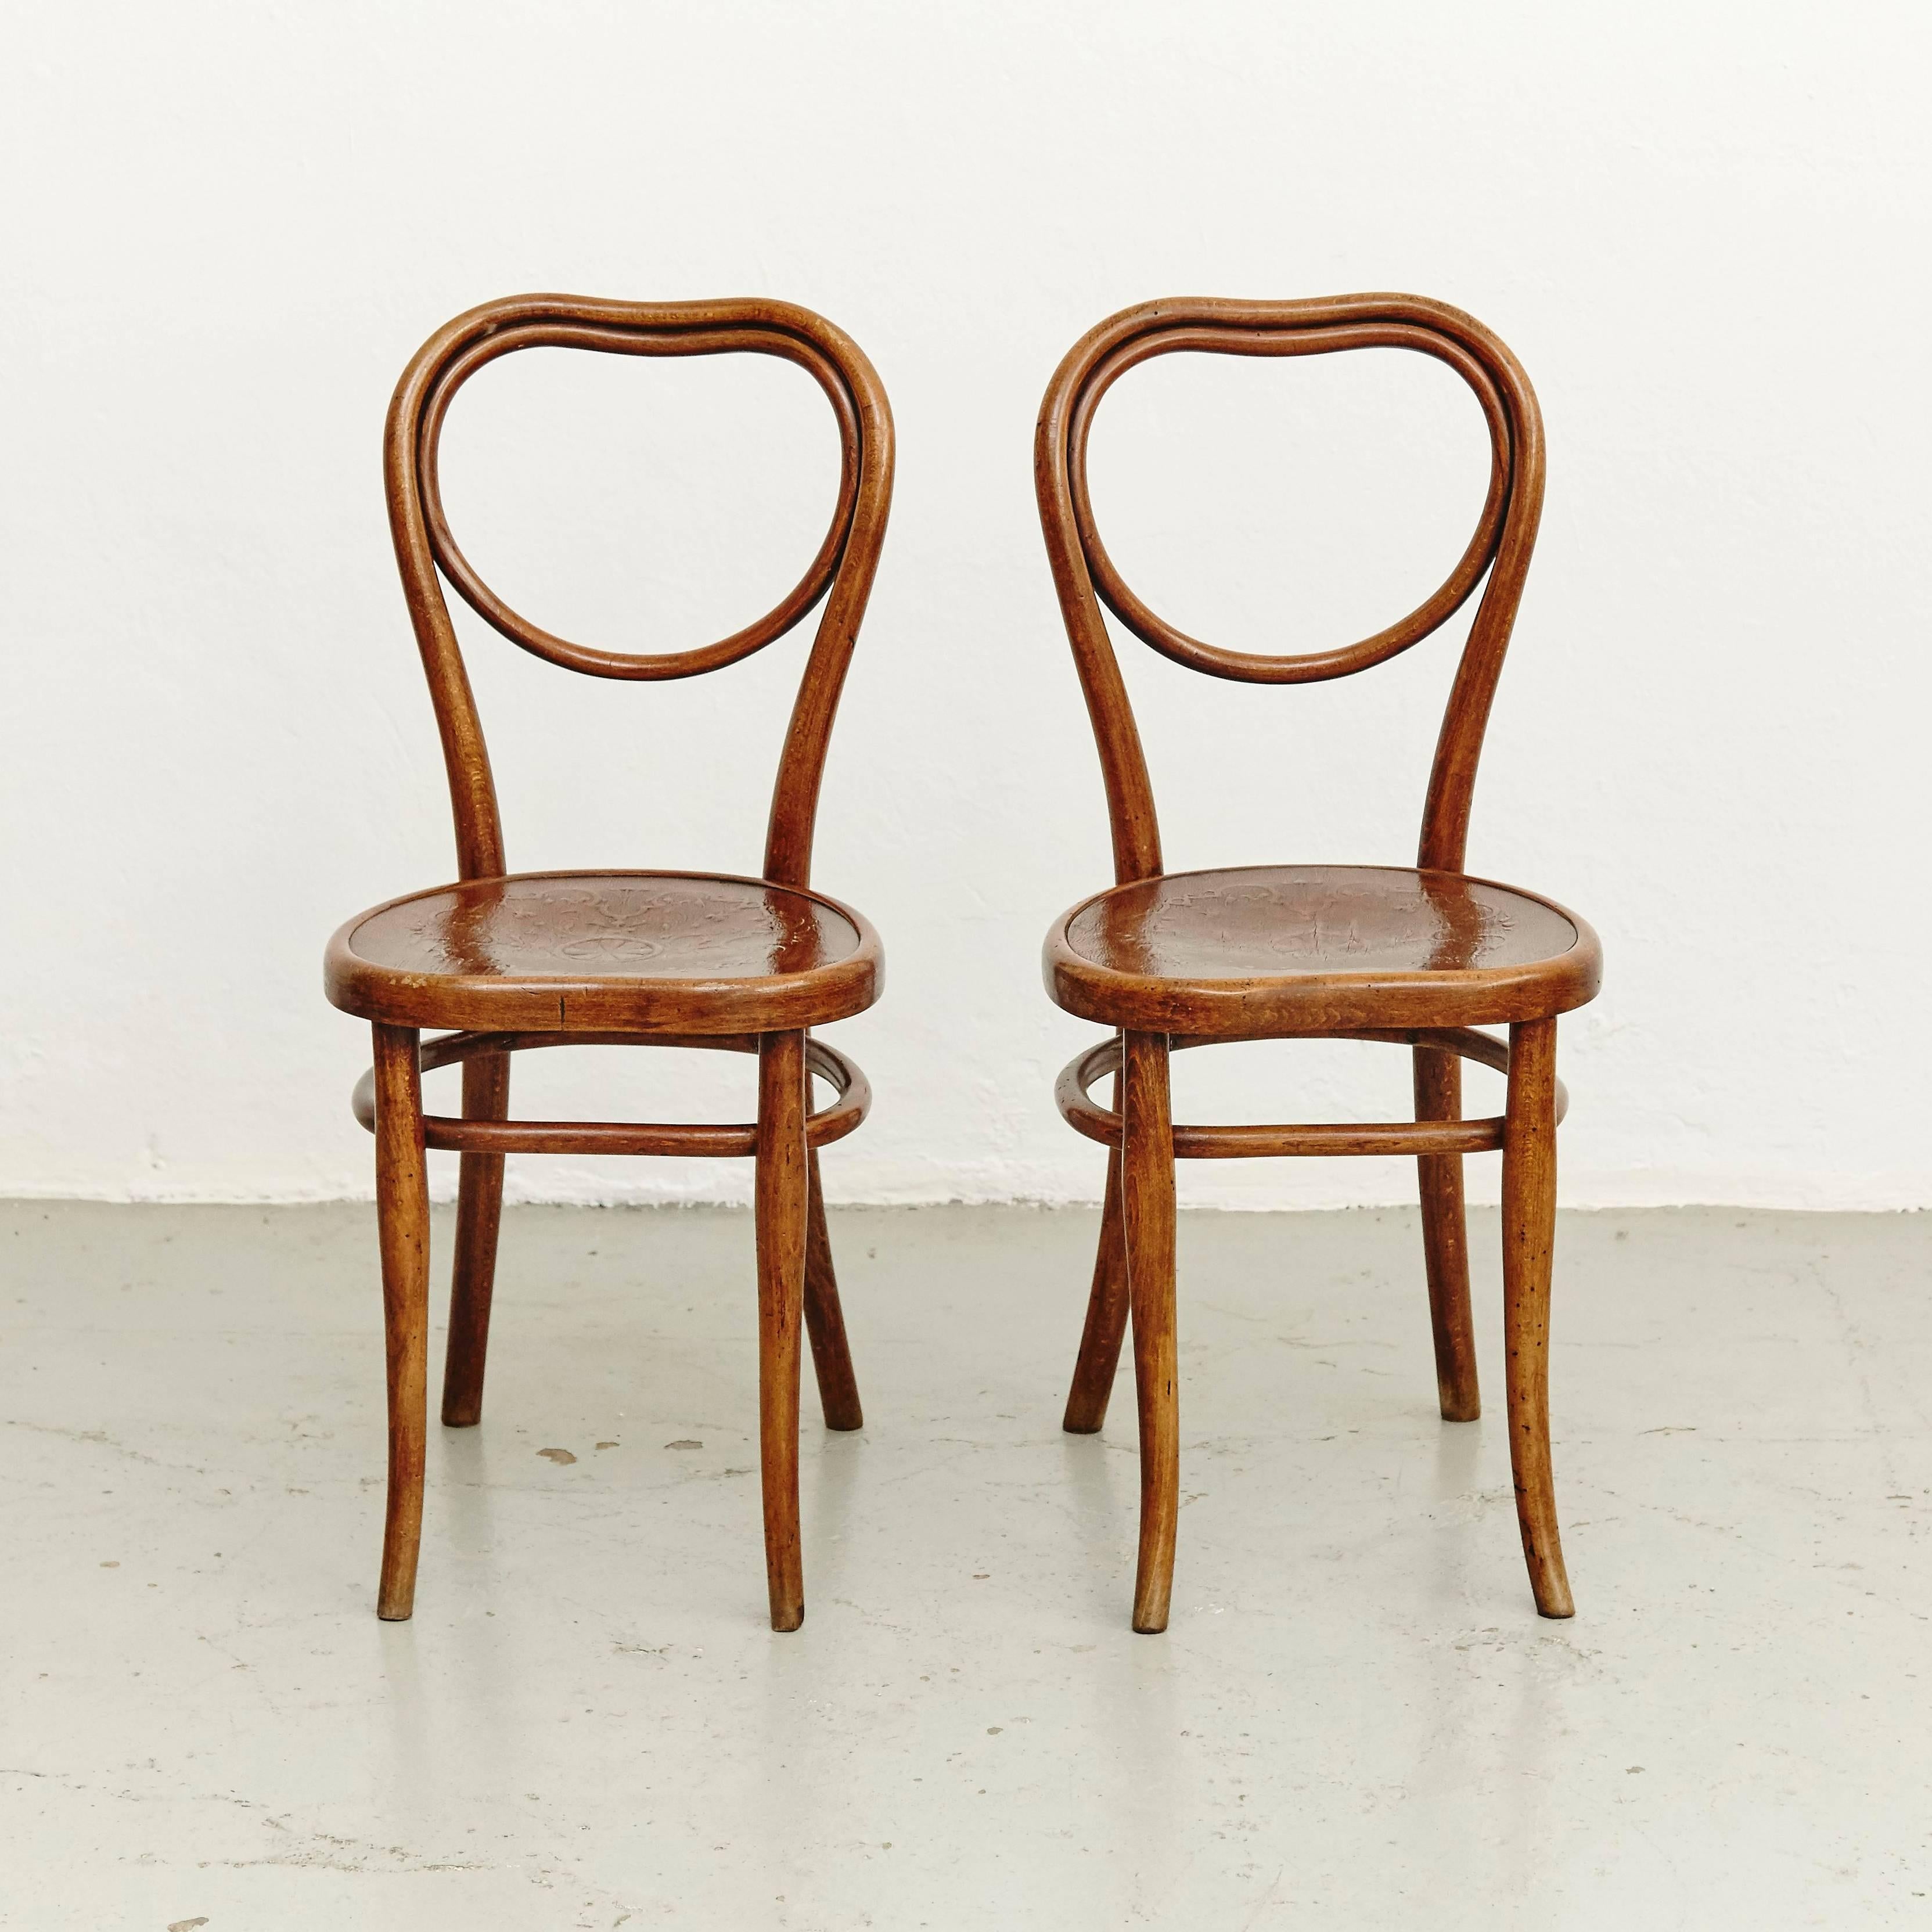 Early 20th Century Pair of Thonet Chairs for Thonet, circa 1920